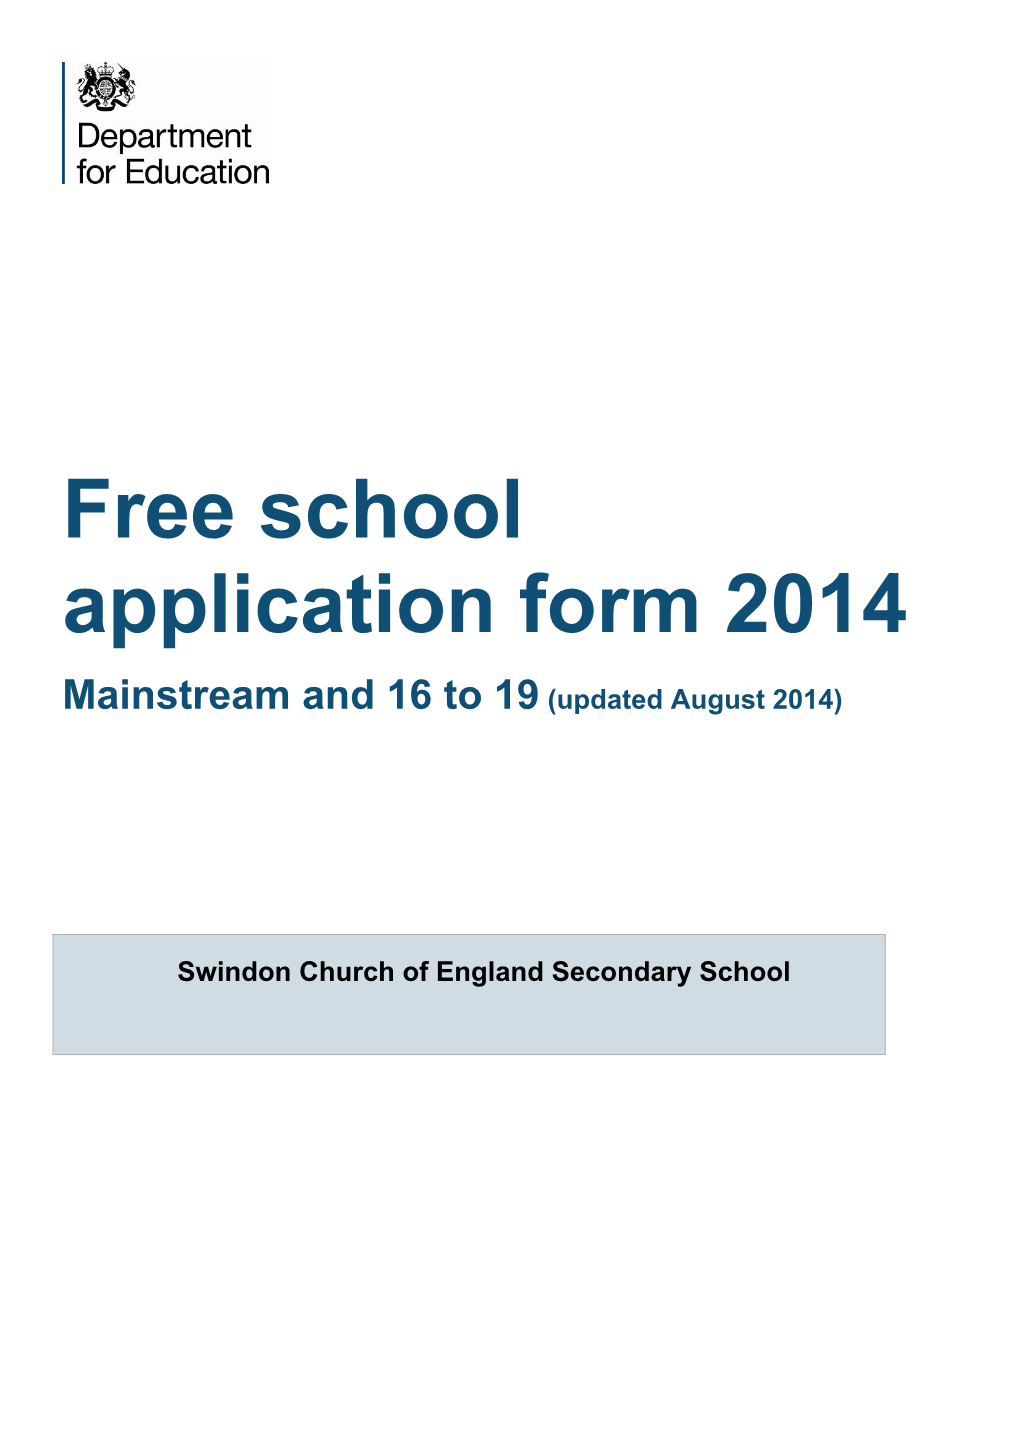 Free School Application Form 2014 Mainstream and 16 to 19 (Updated August 2014)